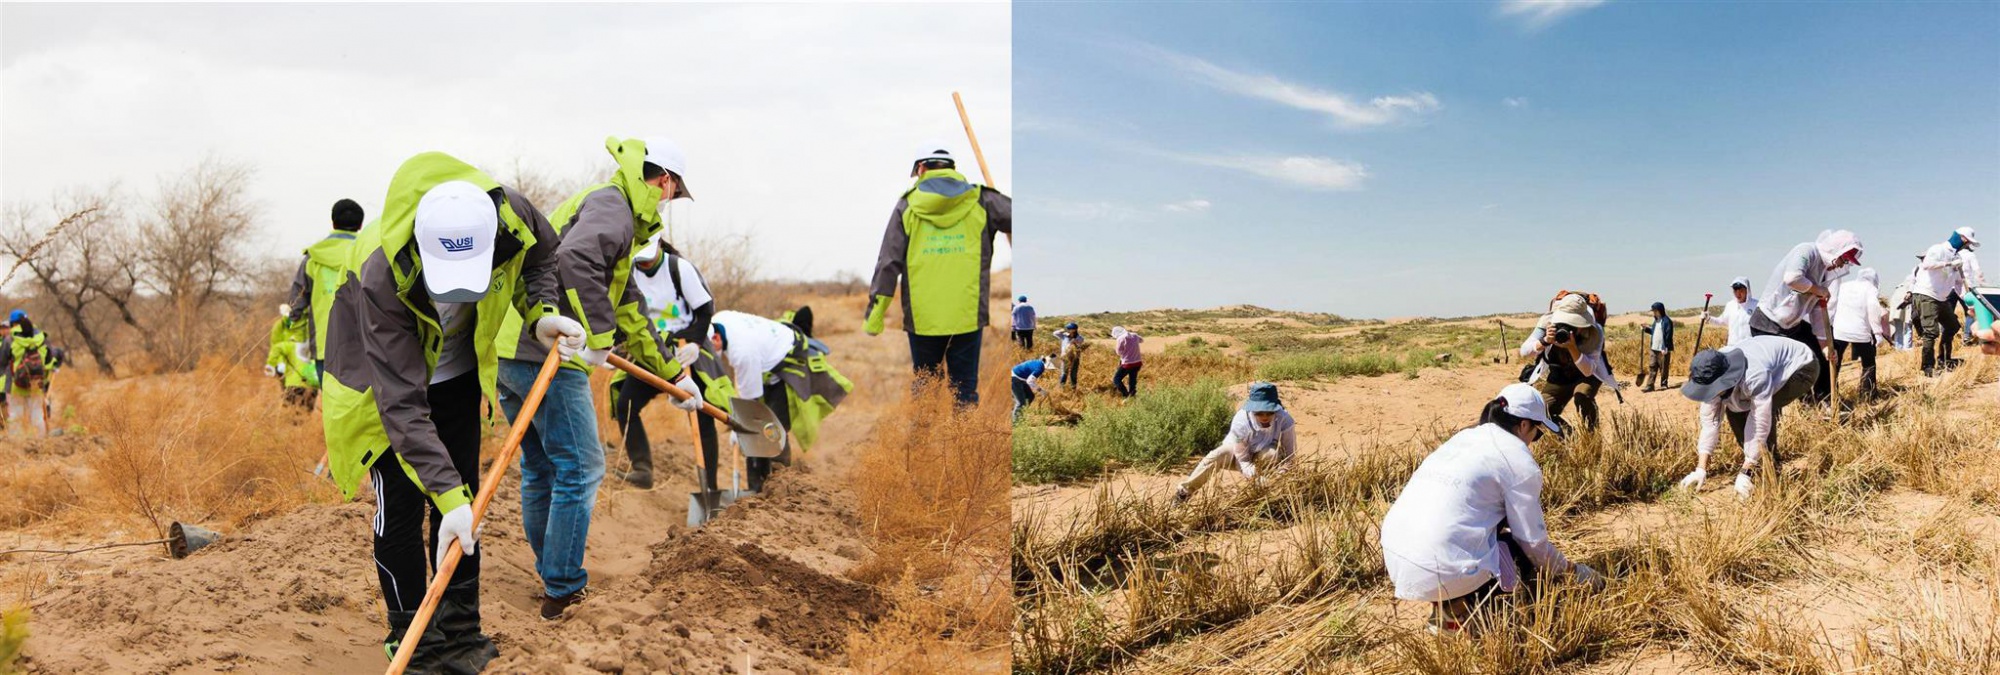 USI Planted 20,000 Trees in Inner Mongolia and Ningxia to Combat Desertification